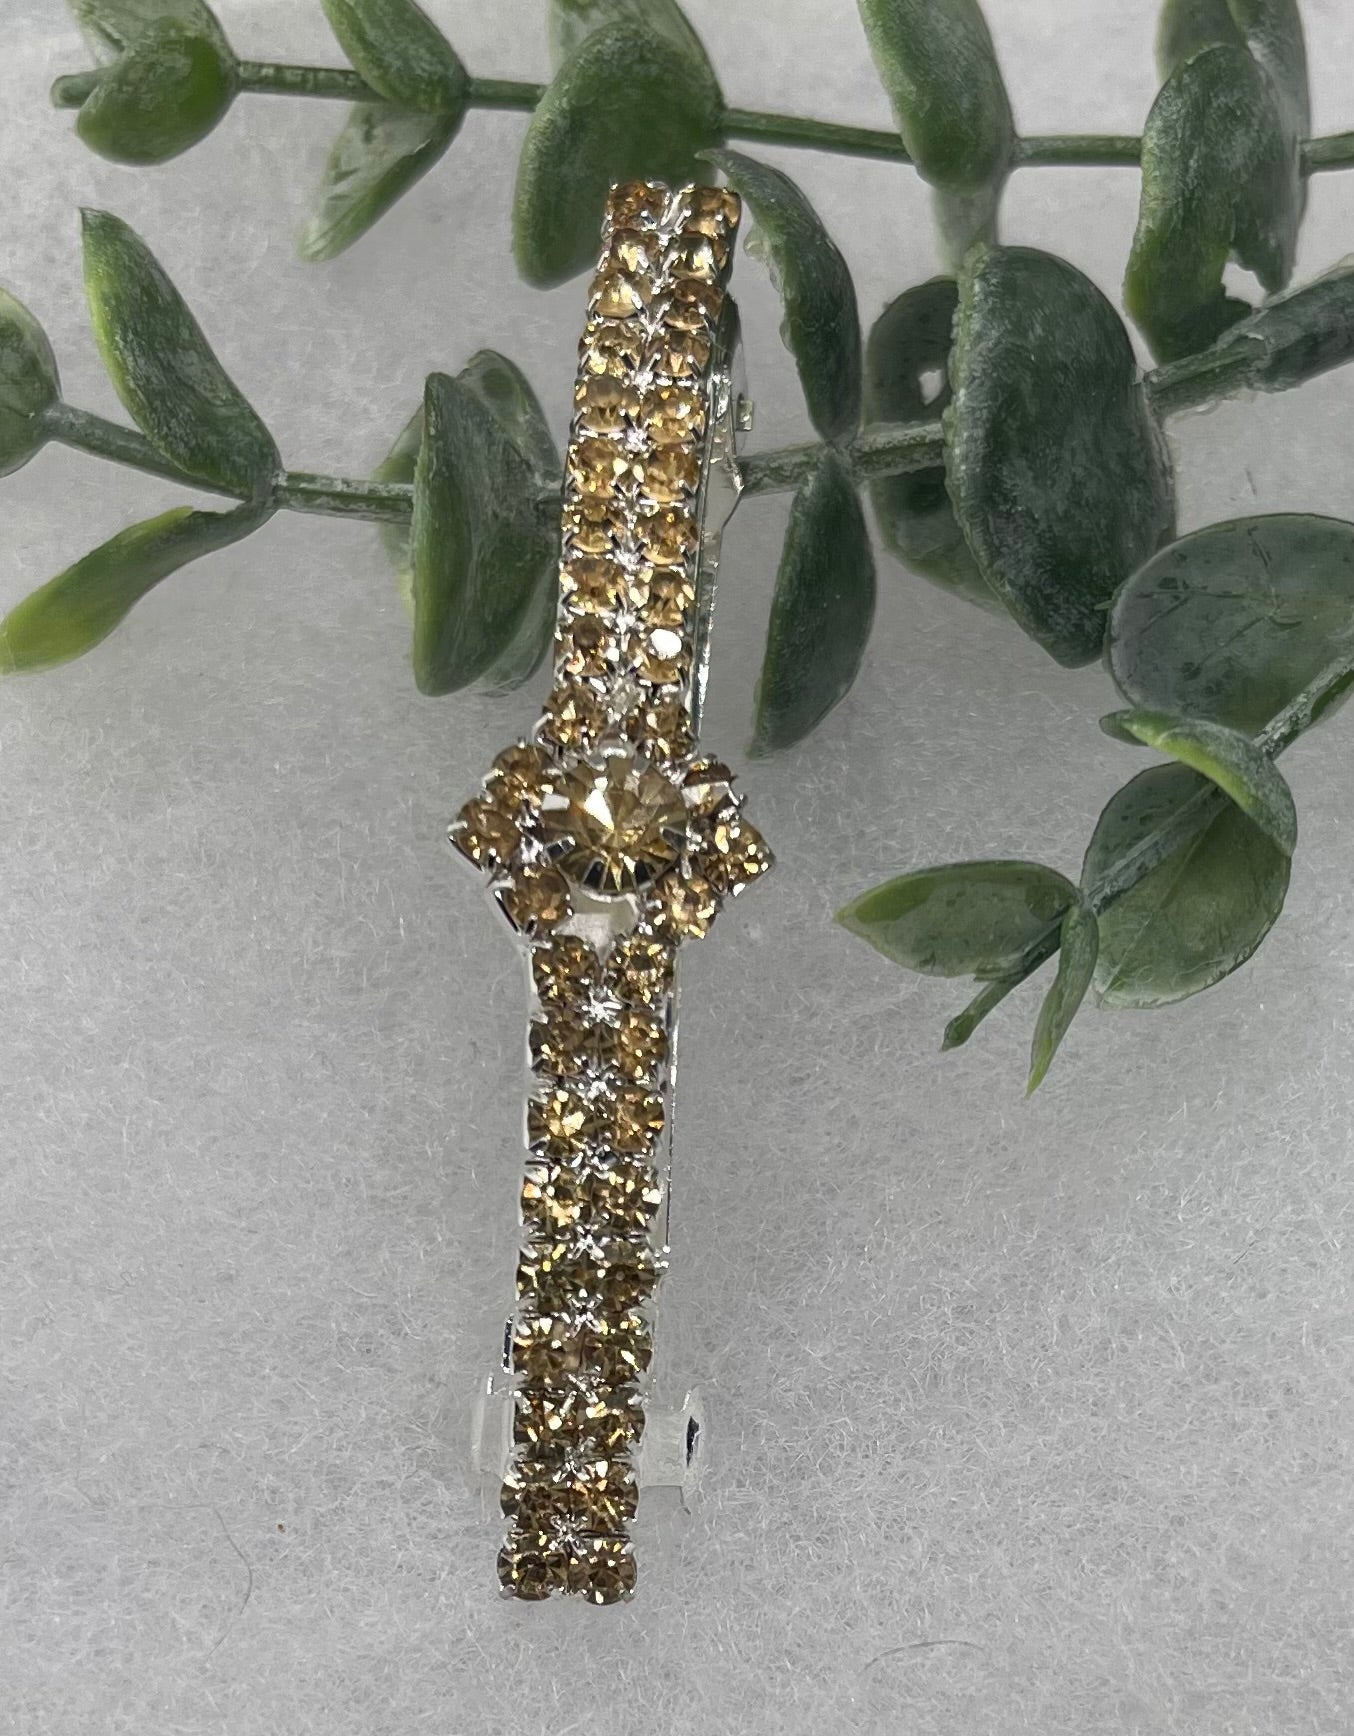 Gold Crystal Rhinestone Barrette approximately 3.0”Metal silver   tone formal hair accessory gift wedding bridal shower accessories